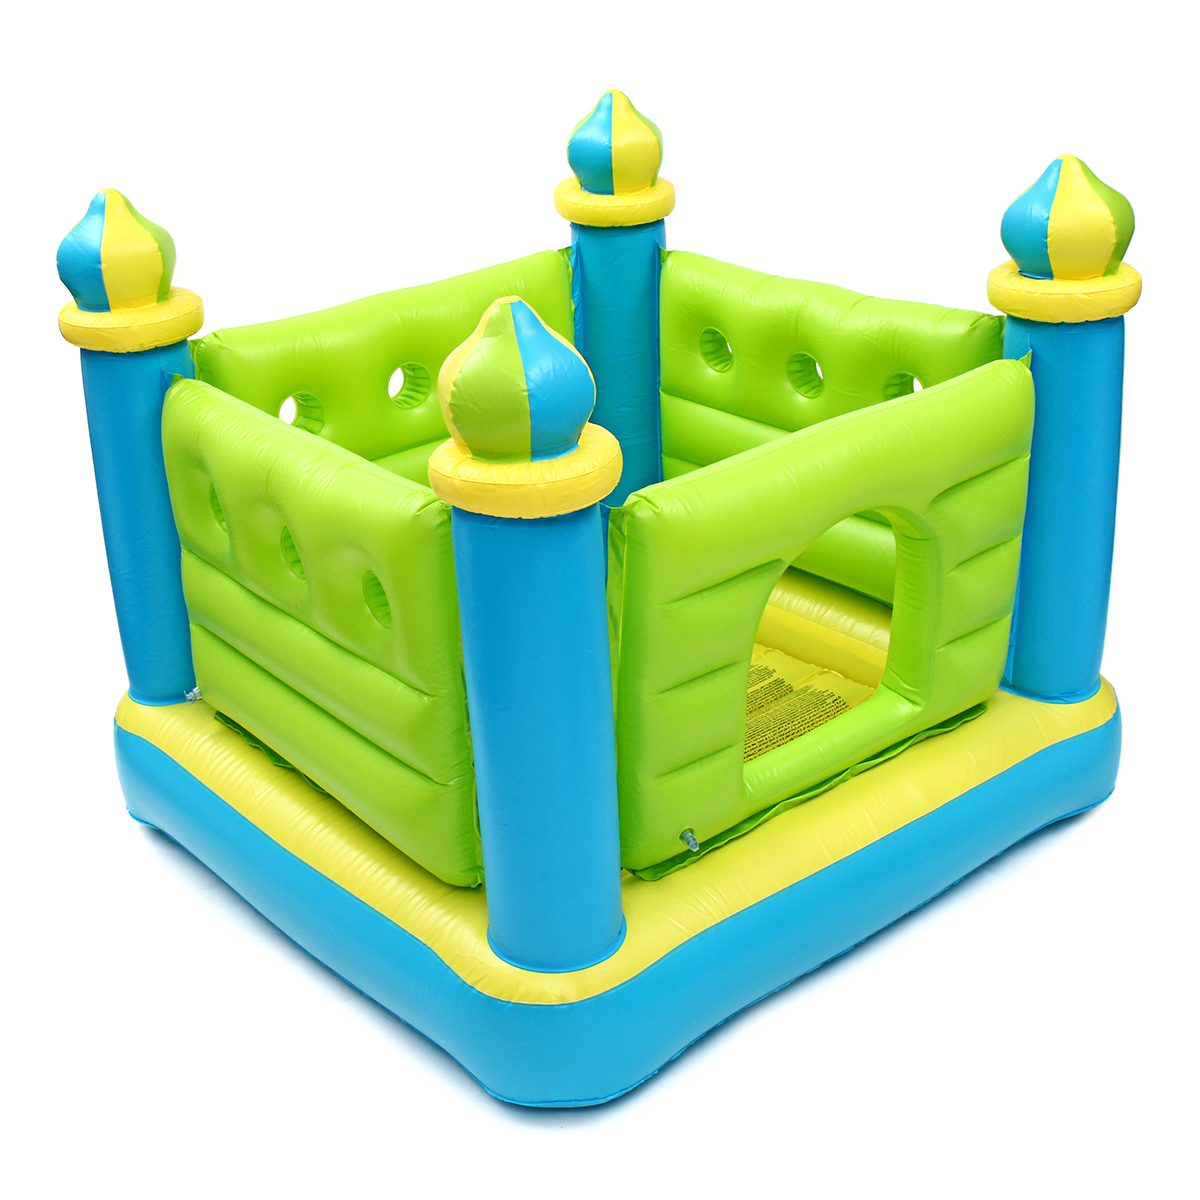 132cm132cm107cm-Inflatable-Toys-Bouncy-House-Castle-Commercial-Kids-Family-Indoor-Outdoor-Toy-1333569